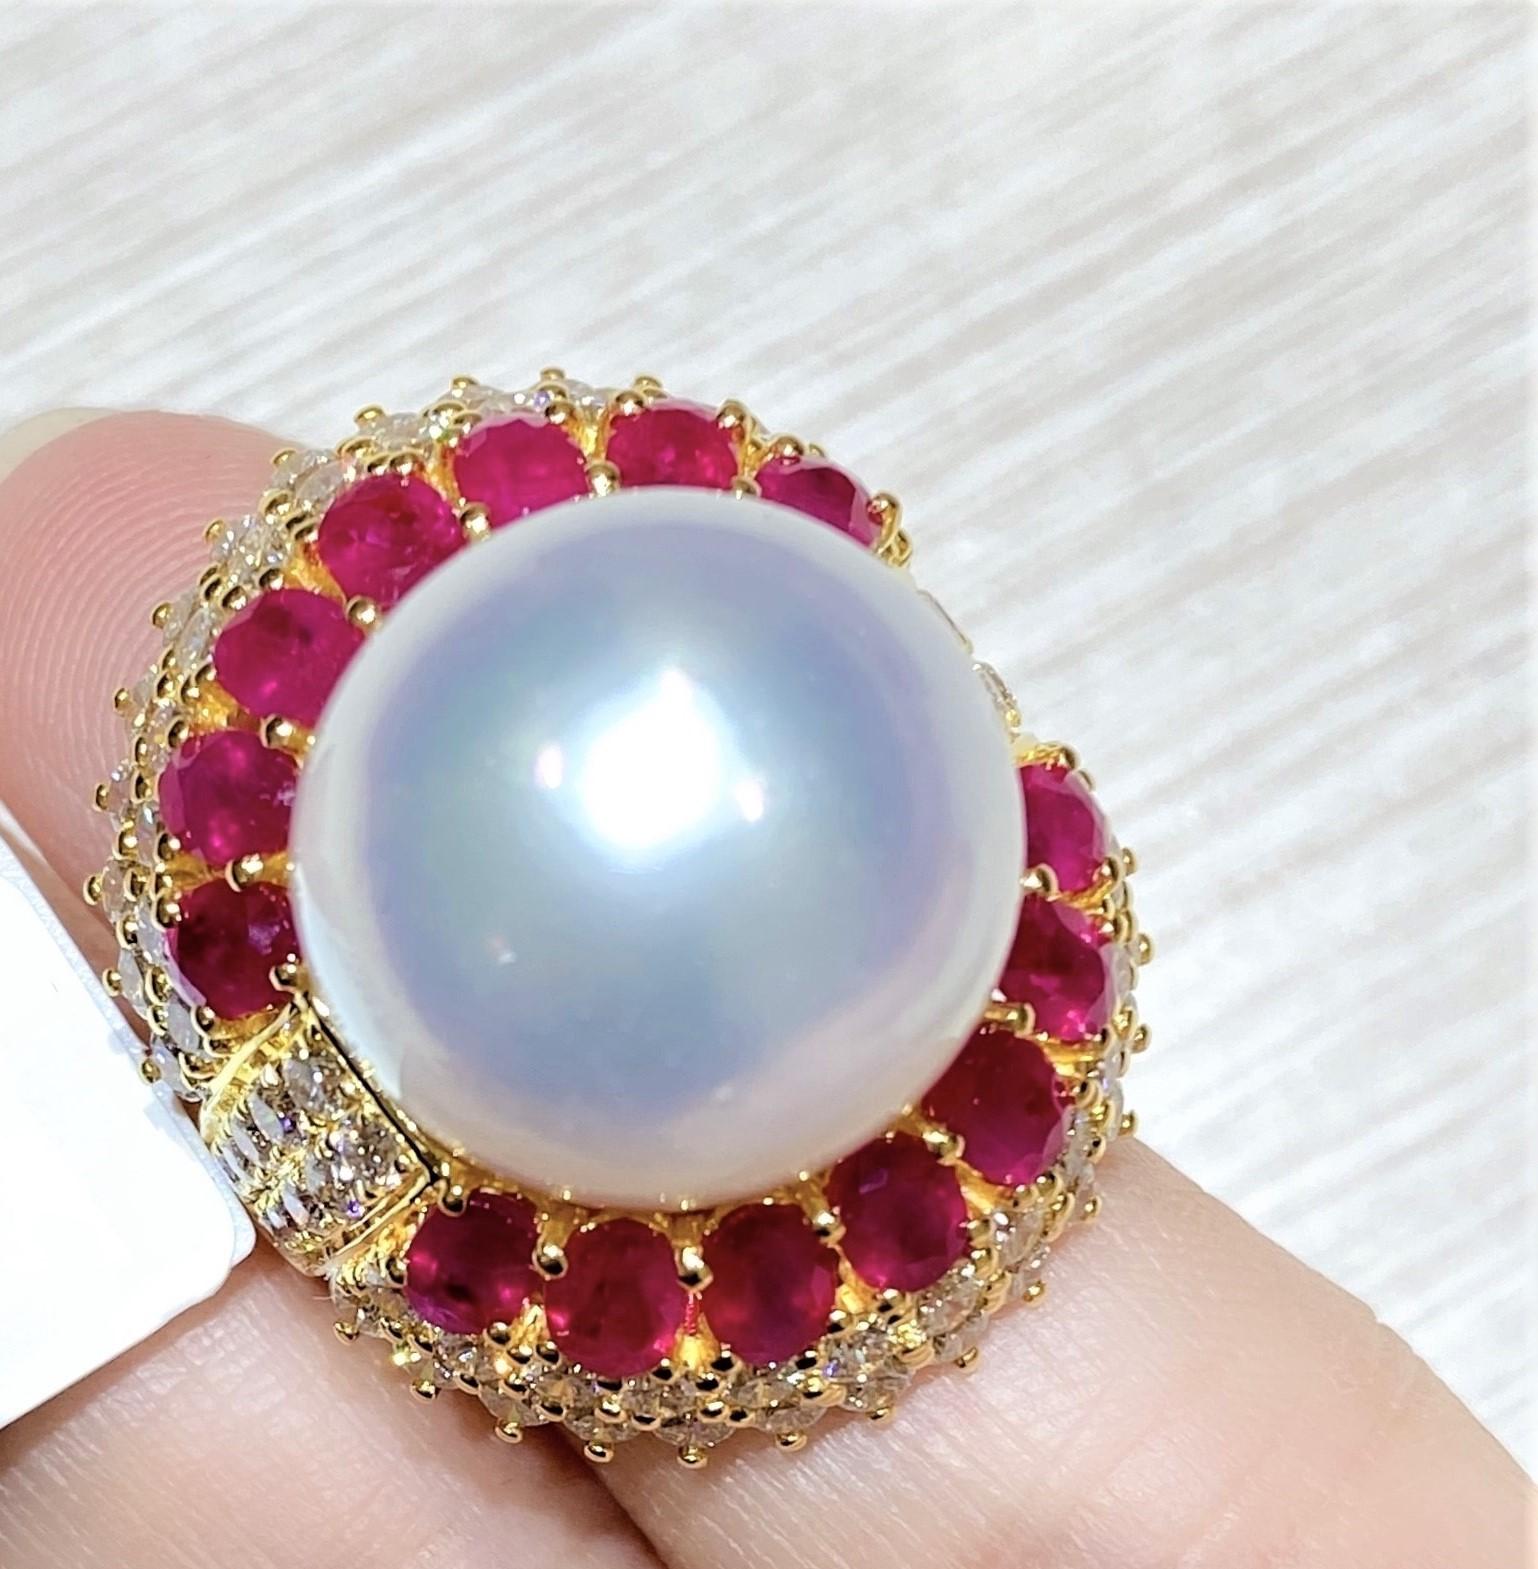 The Following Item we are offering is this Extremely Rare Beautiful 18KT Gold Fine Fancy Rare Large South Sea Pearl Ruby Diamond Ring. This Magnificent Ring is comprised of a Rare Fine Large South Sea Pearl and Round Gorgeous Glittering Fancy Rubies